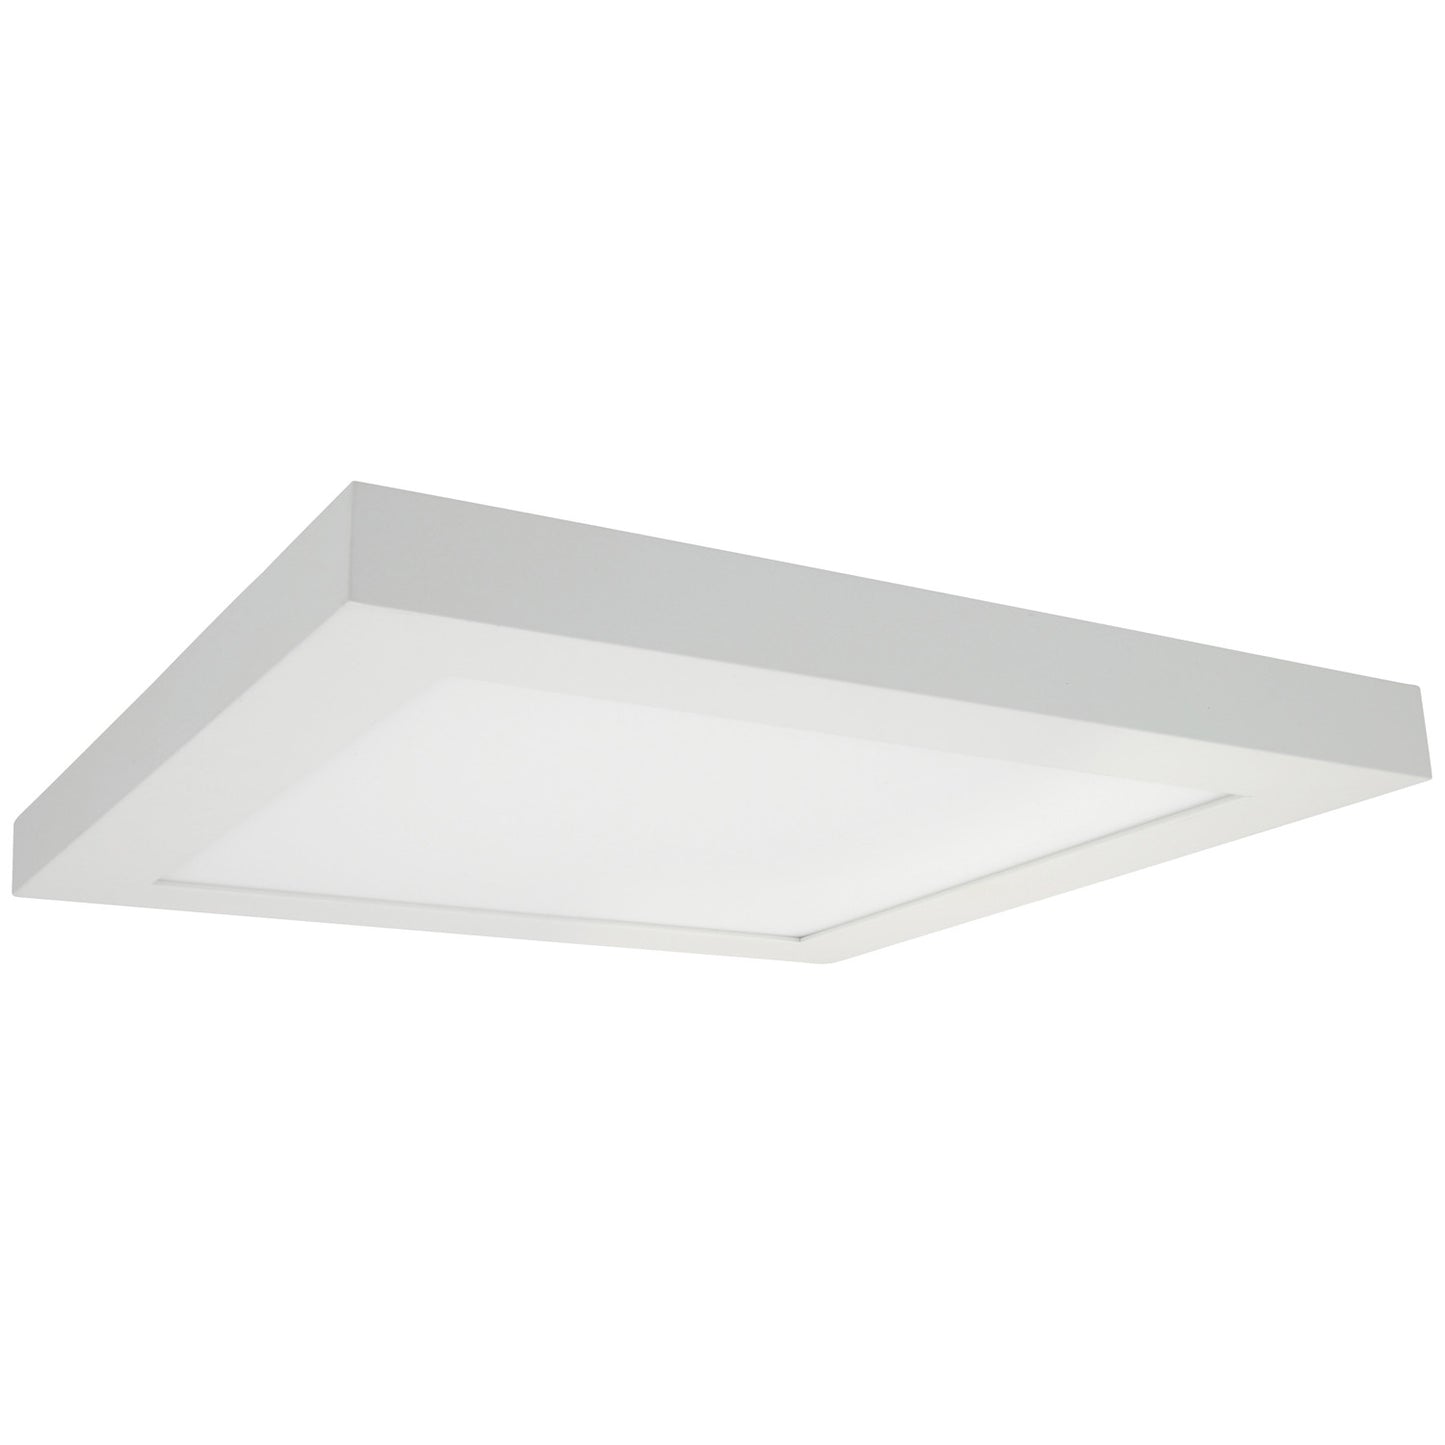 LED Tunable 12-Inch Square Flat Panel Light Fixture, 10 Watts, 920 Lumens, Slim Design, Ceiling Mount, 30K/35K/40K/45K/50K CCT, Dimmable, White Finish, 50,000 Hour, UL Listed, 1 Count